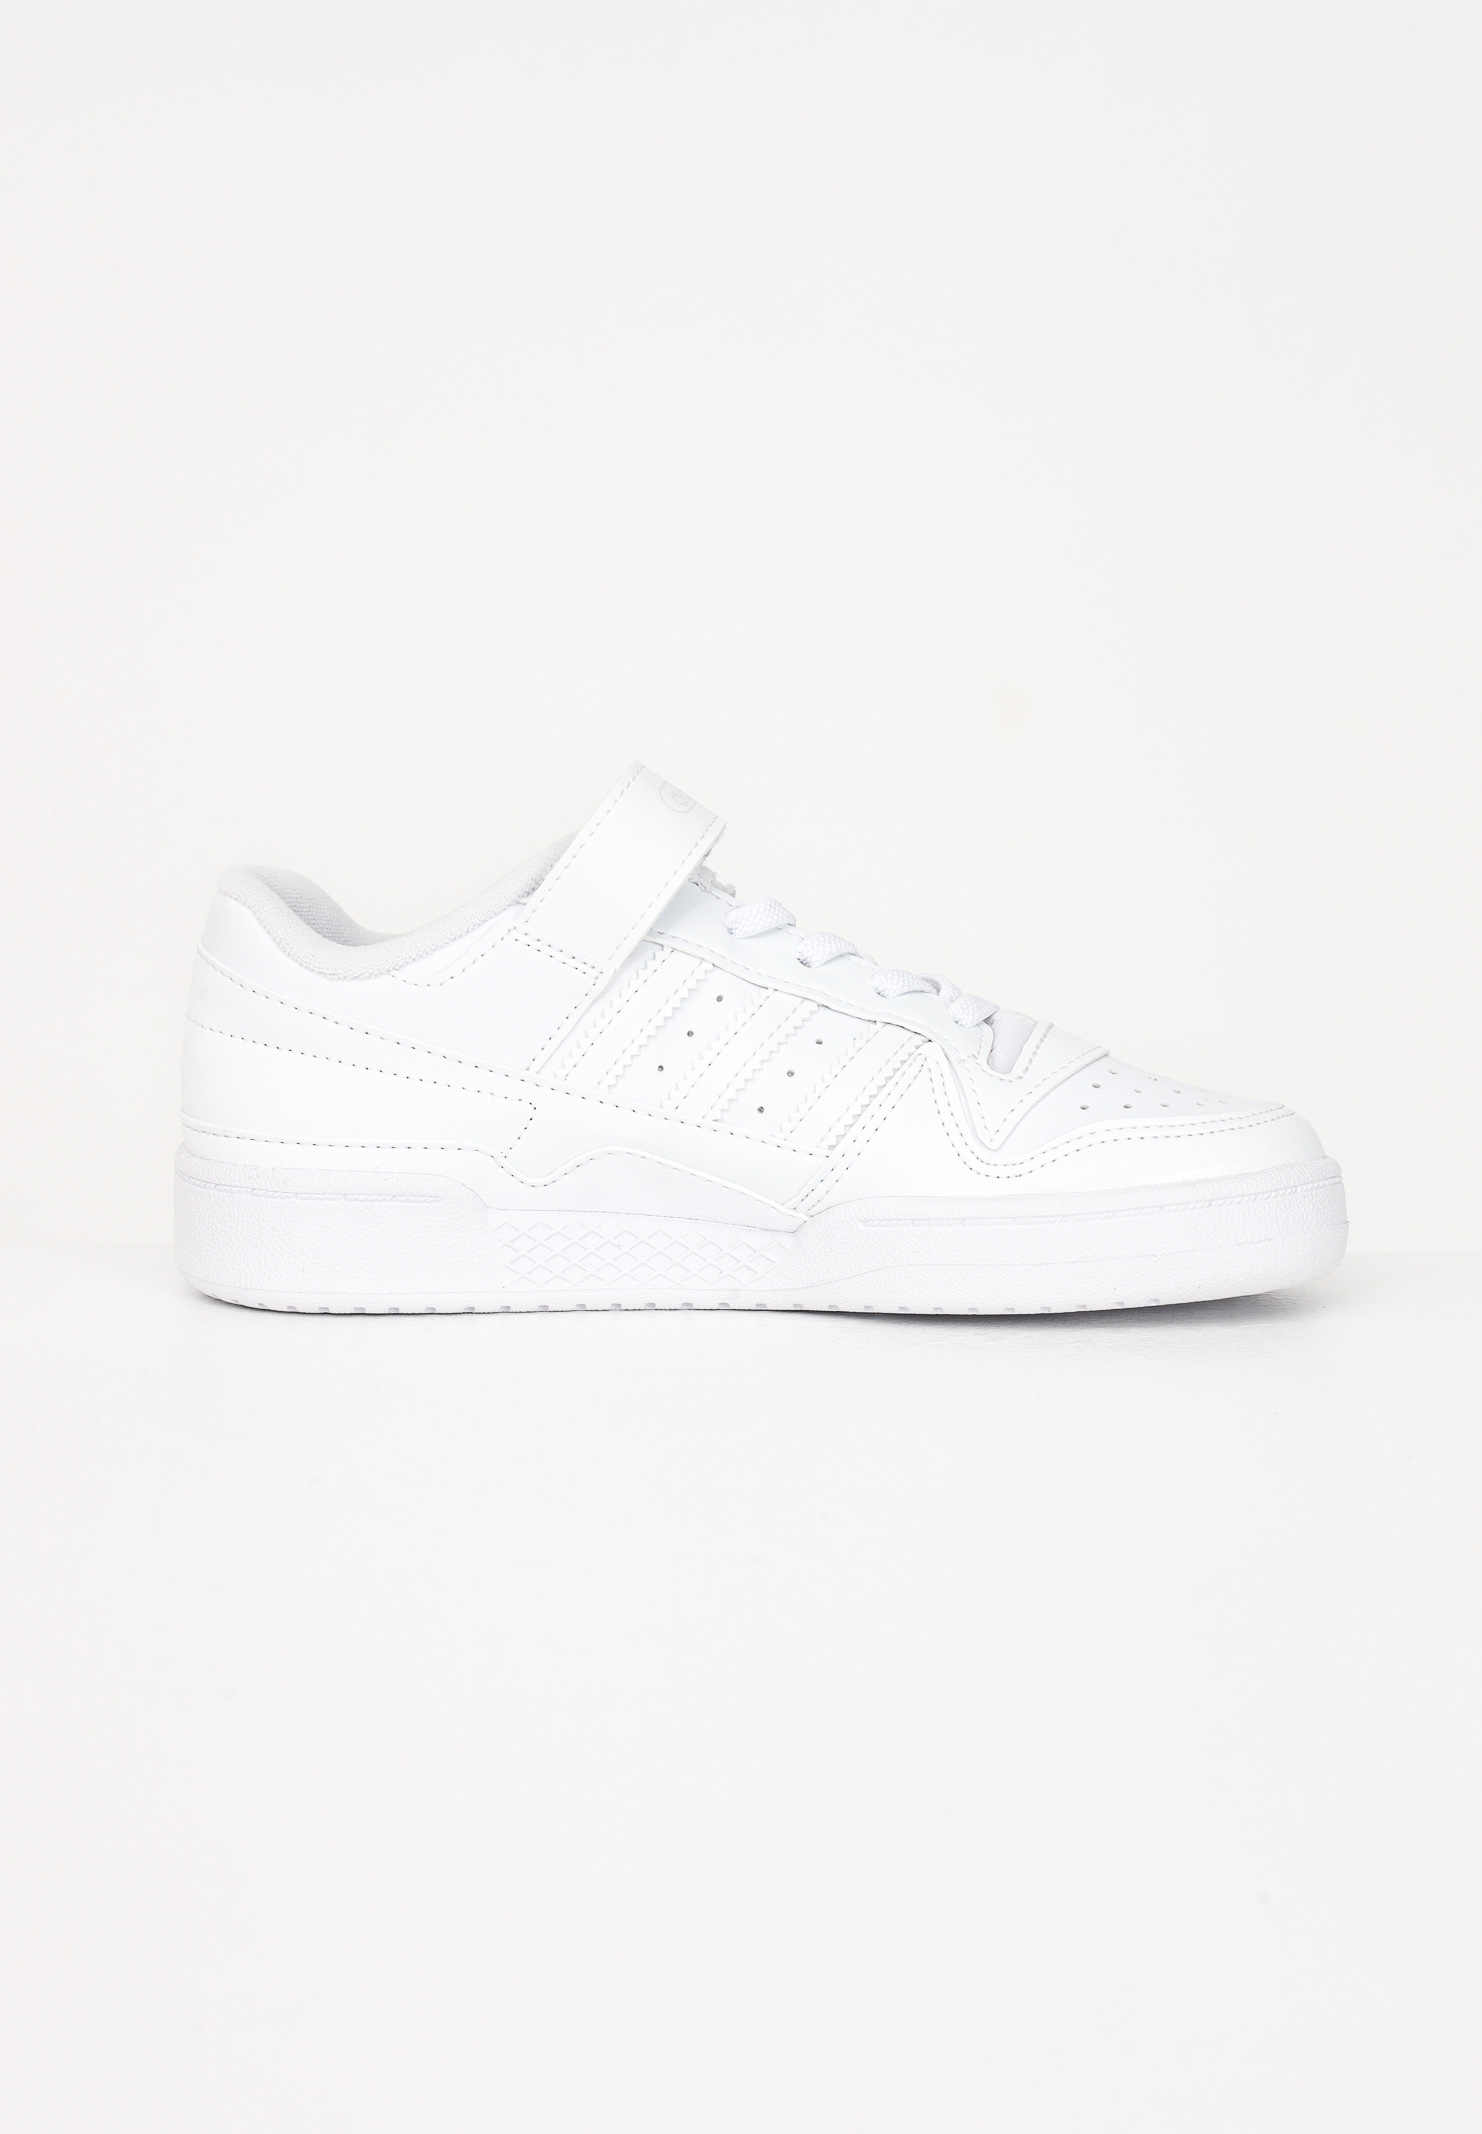 White Forum Low sneakers for boys and girls - ADIDAS - Pavidas